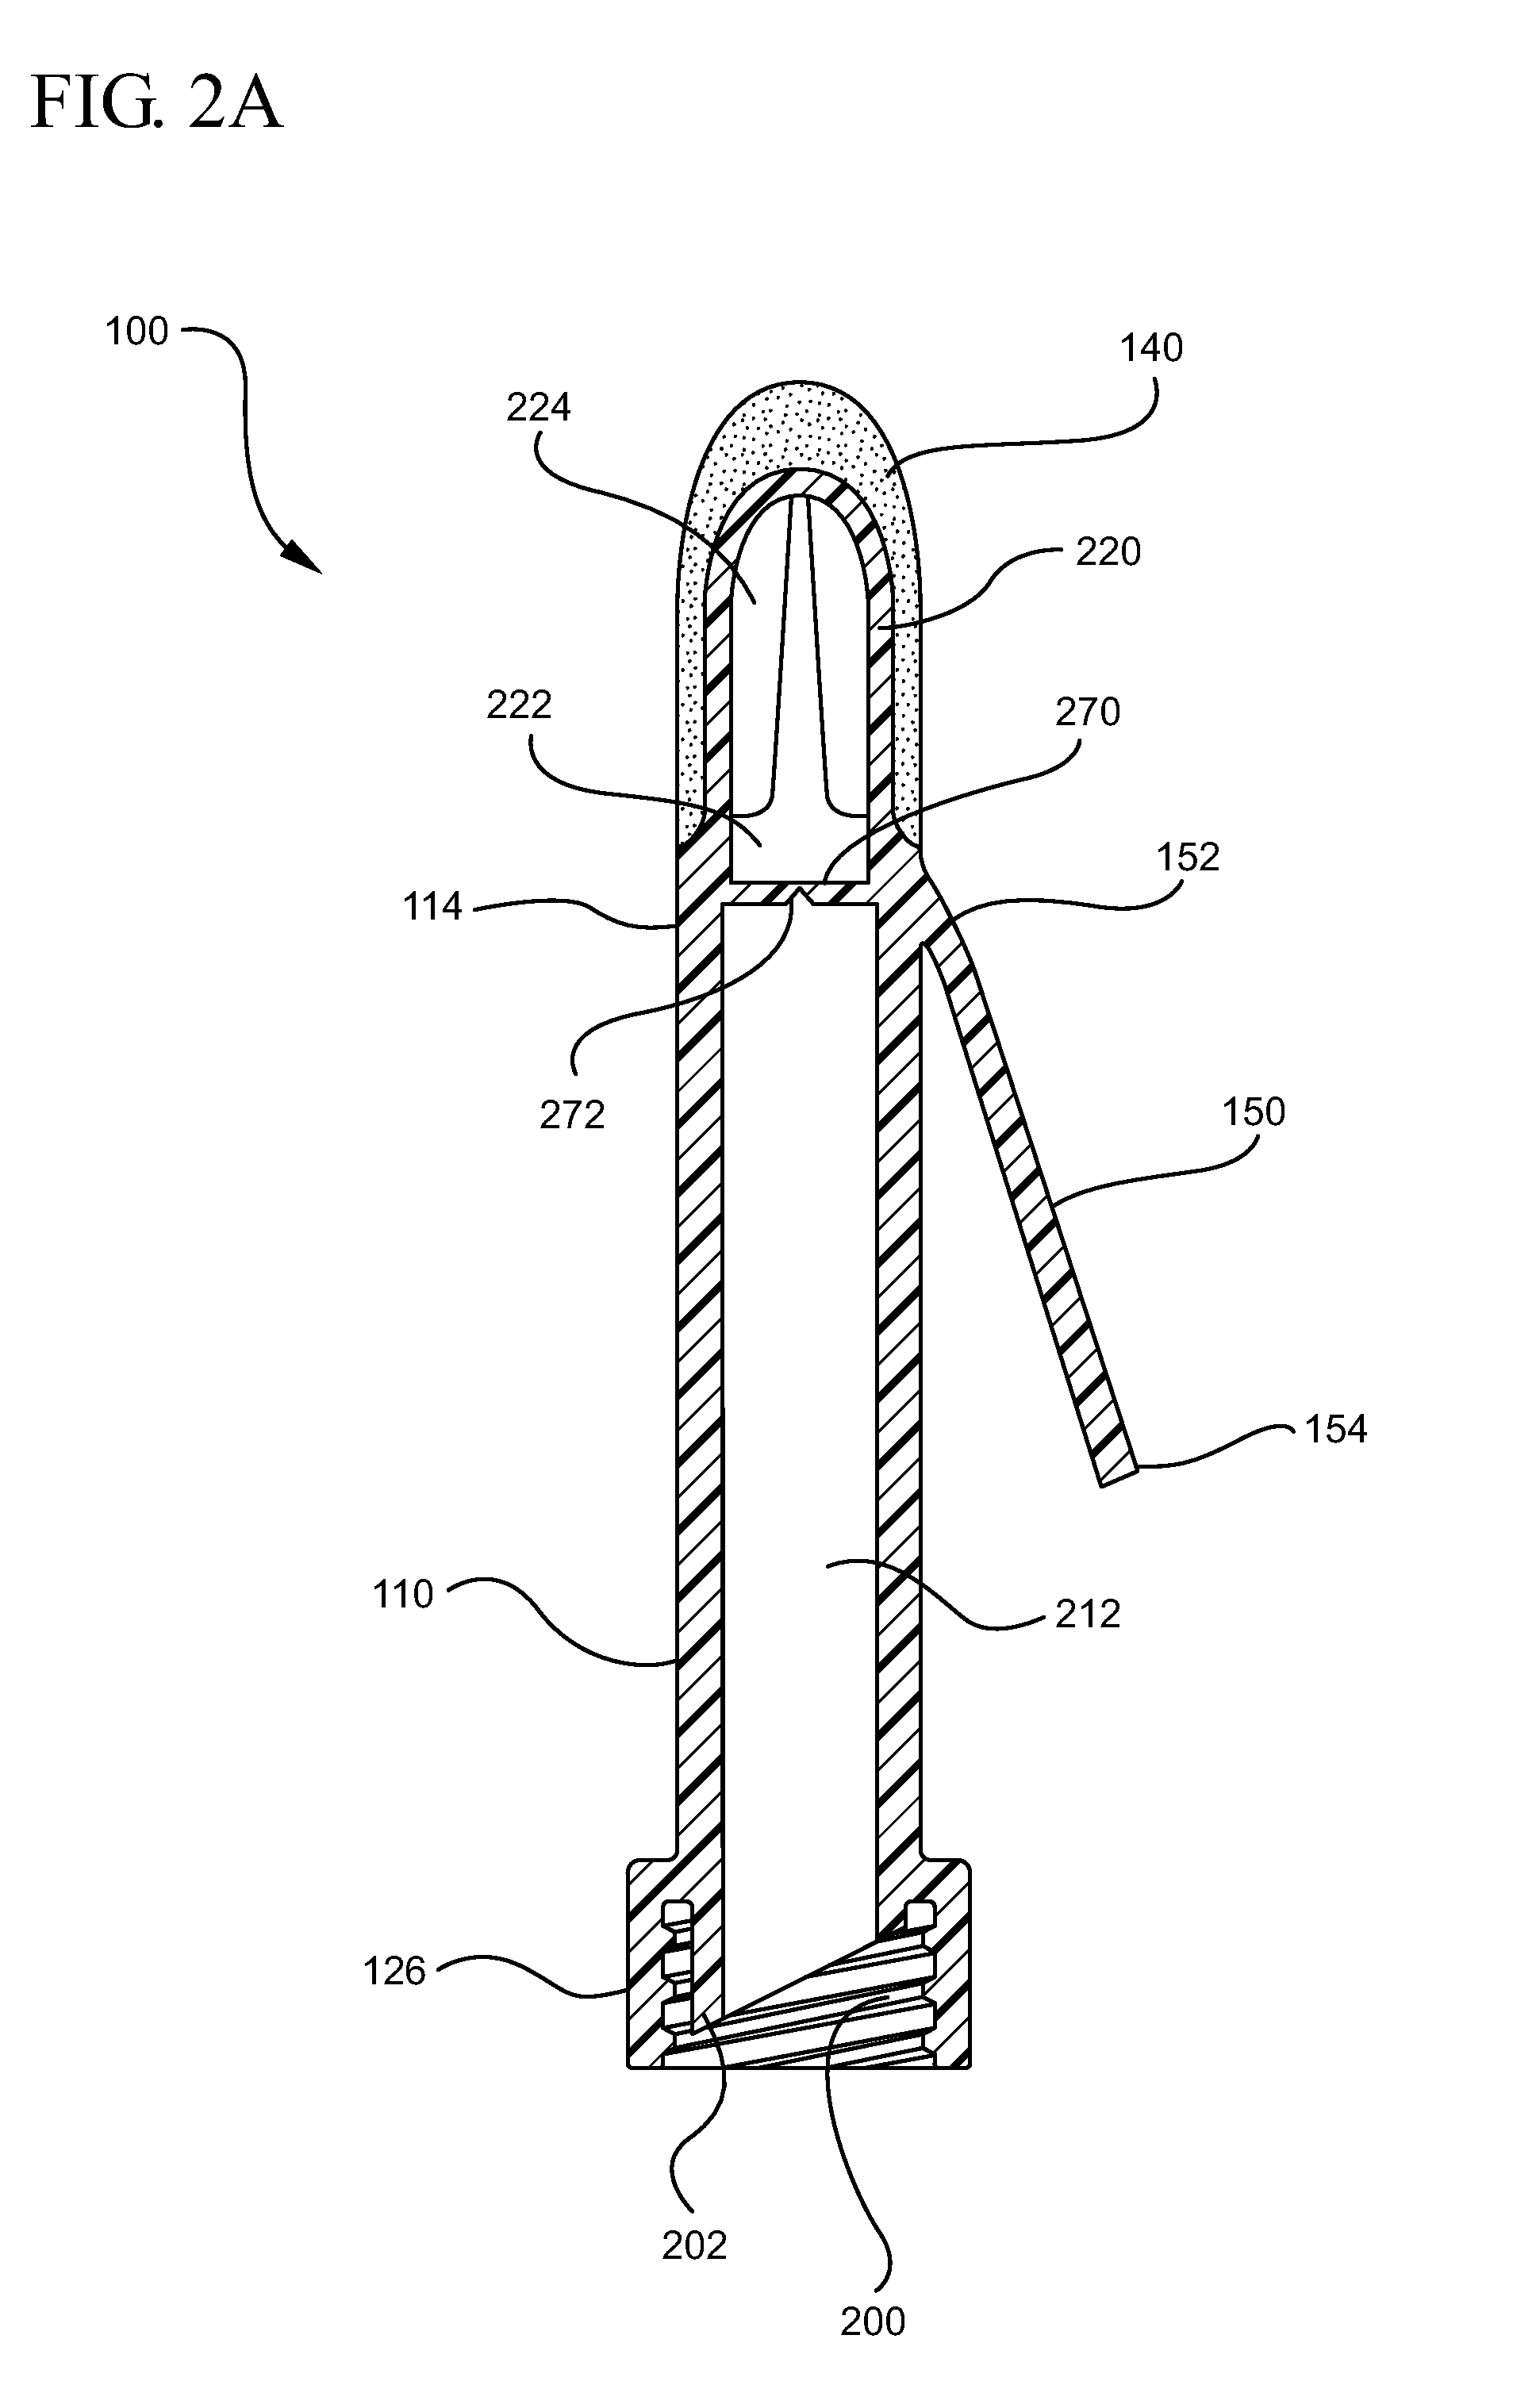 Systems and methods for providing an antiseptic applicator